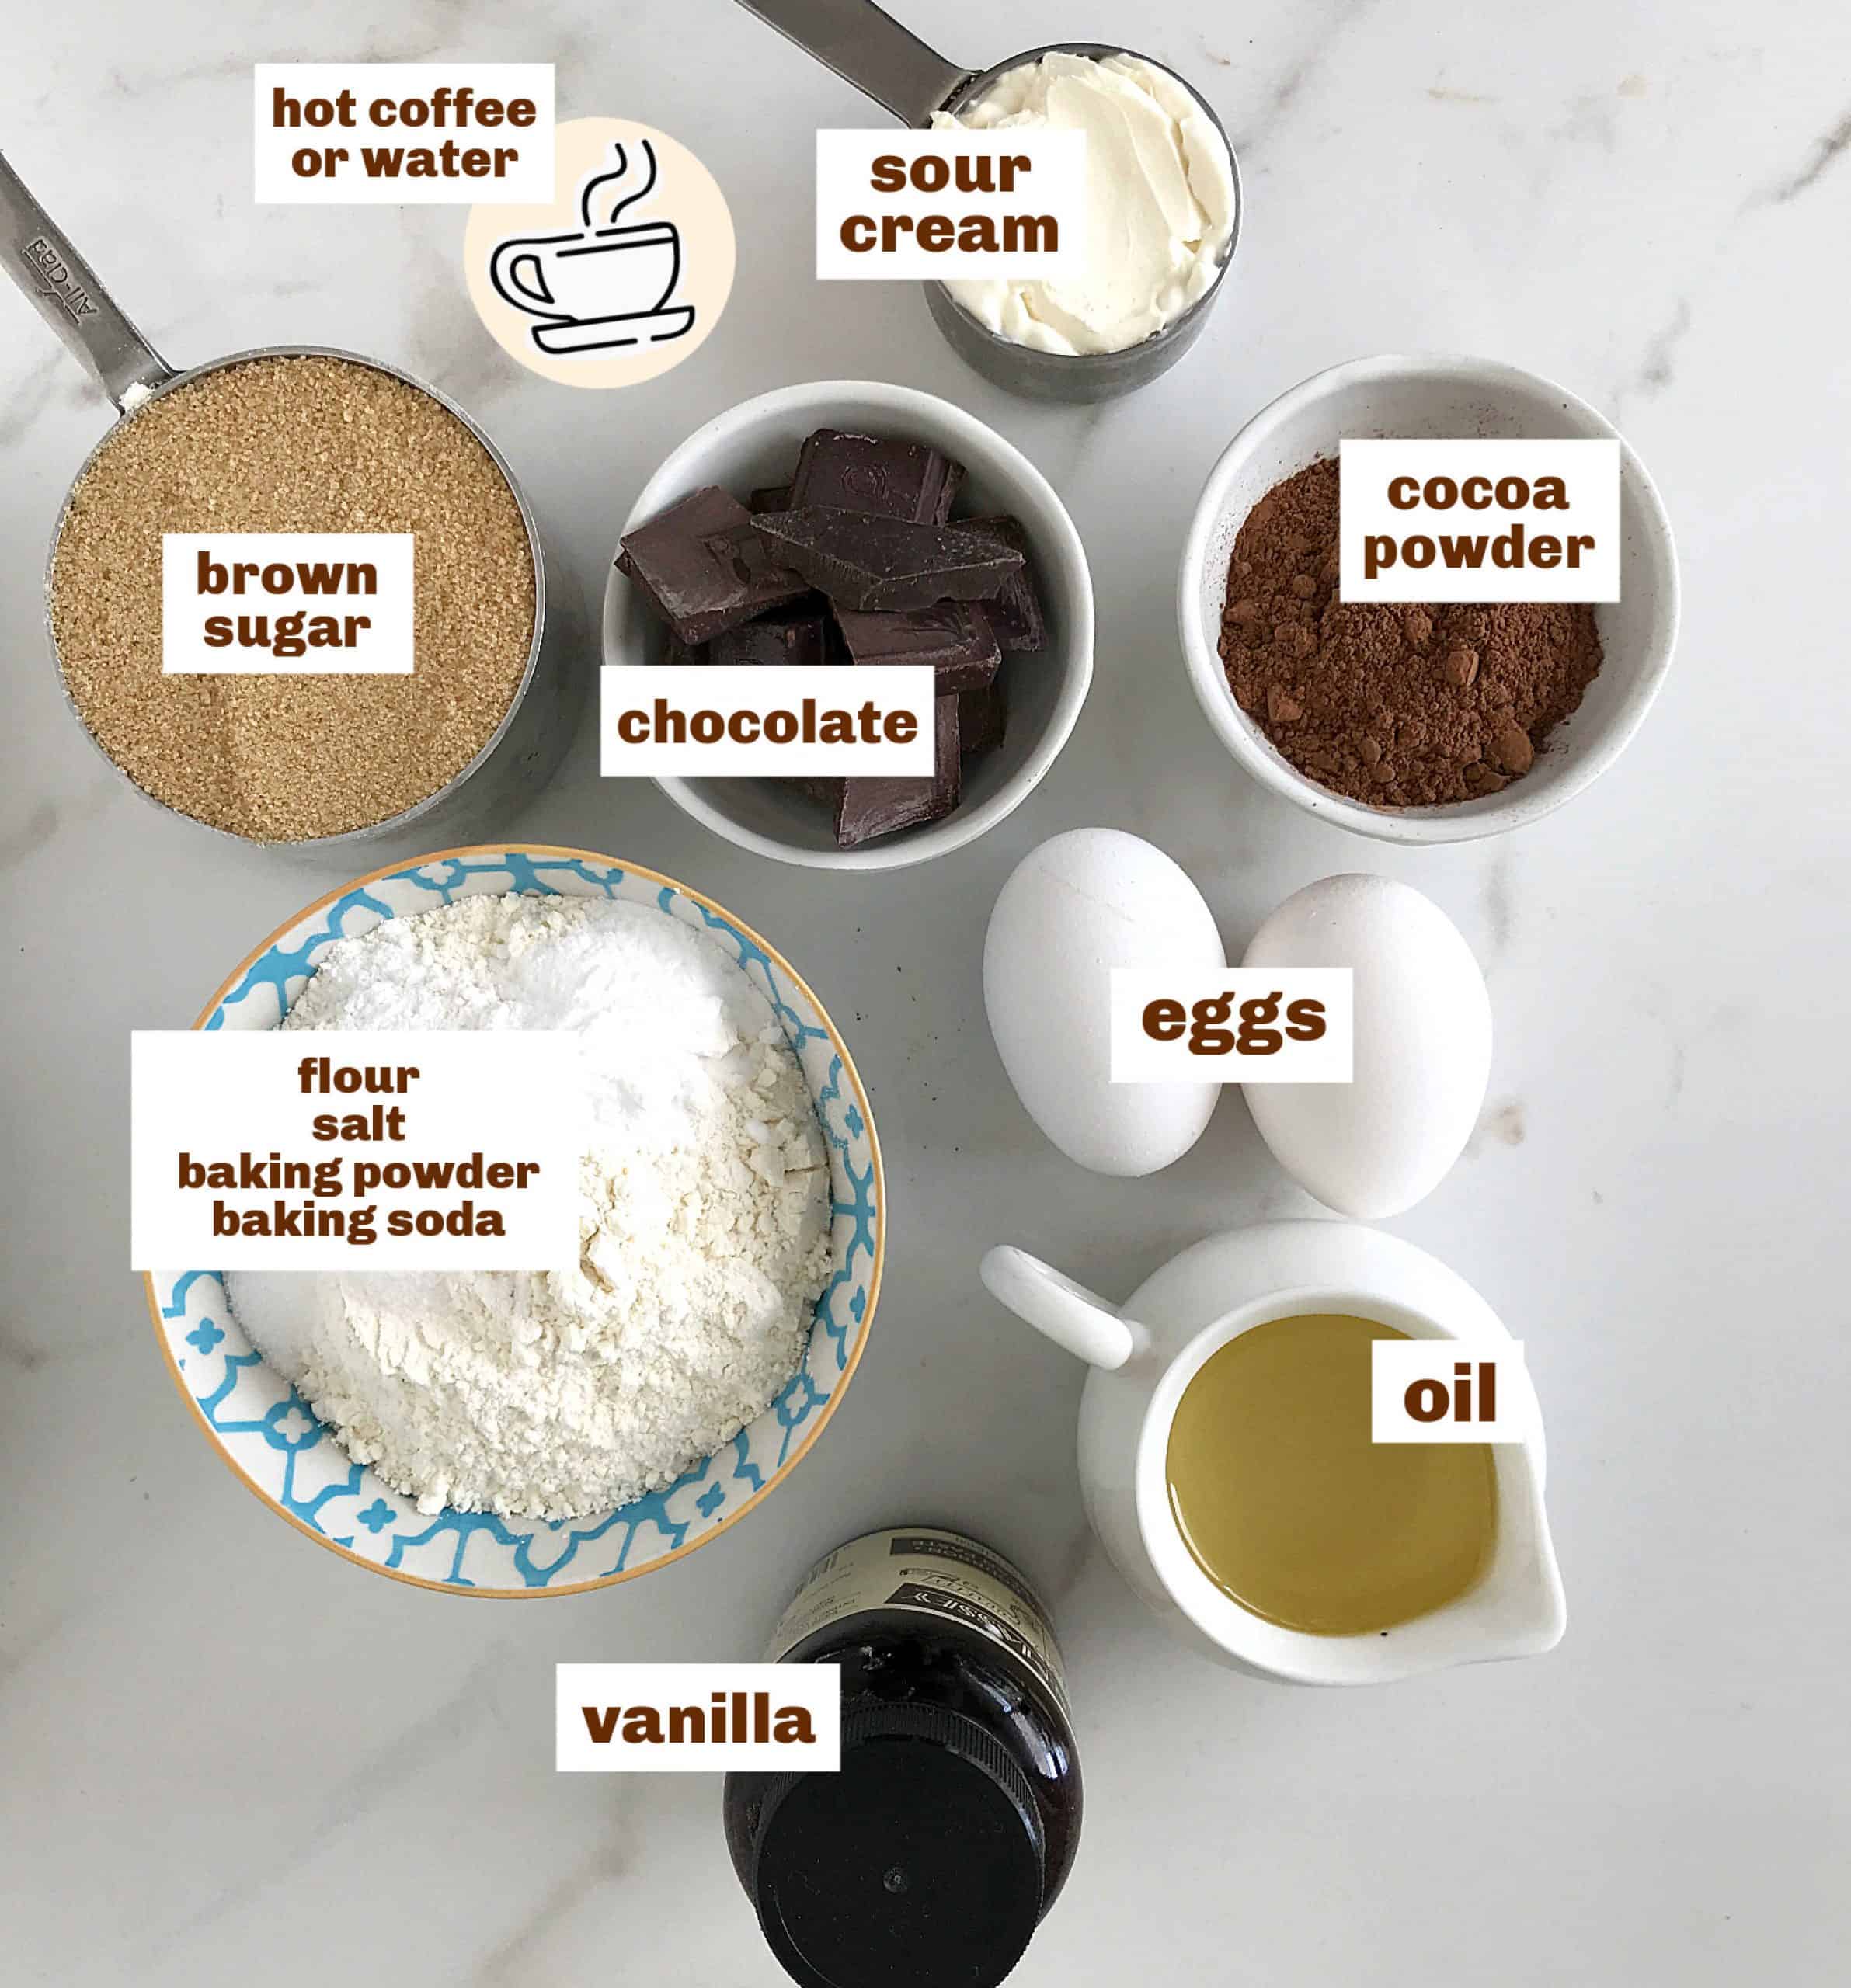 White marble surface with several bowls with ingredients for chocolate layer cake, image with text